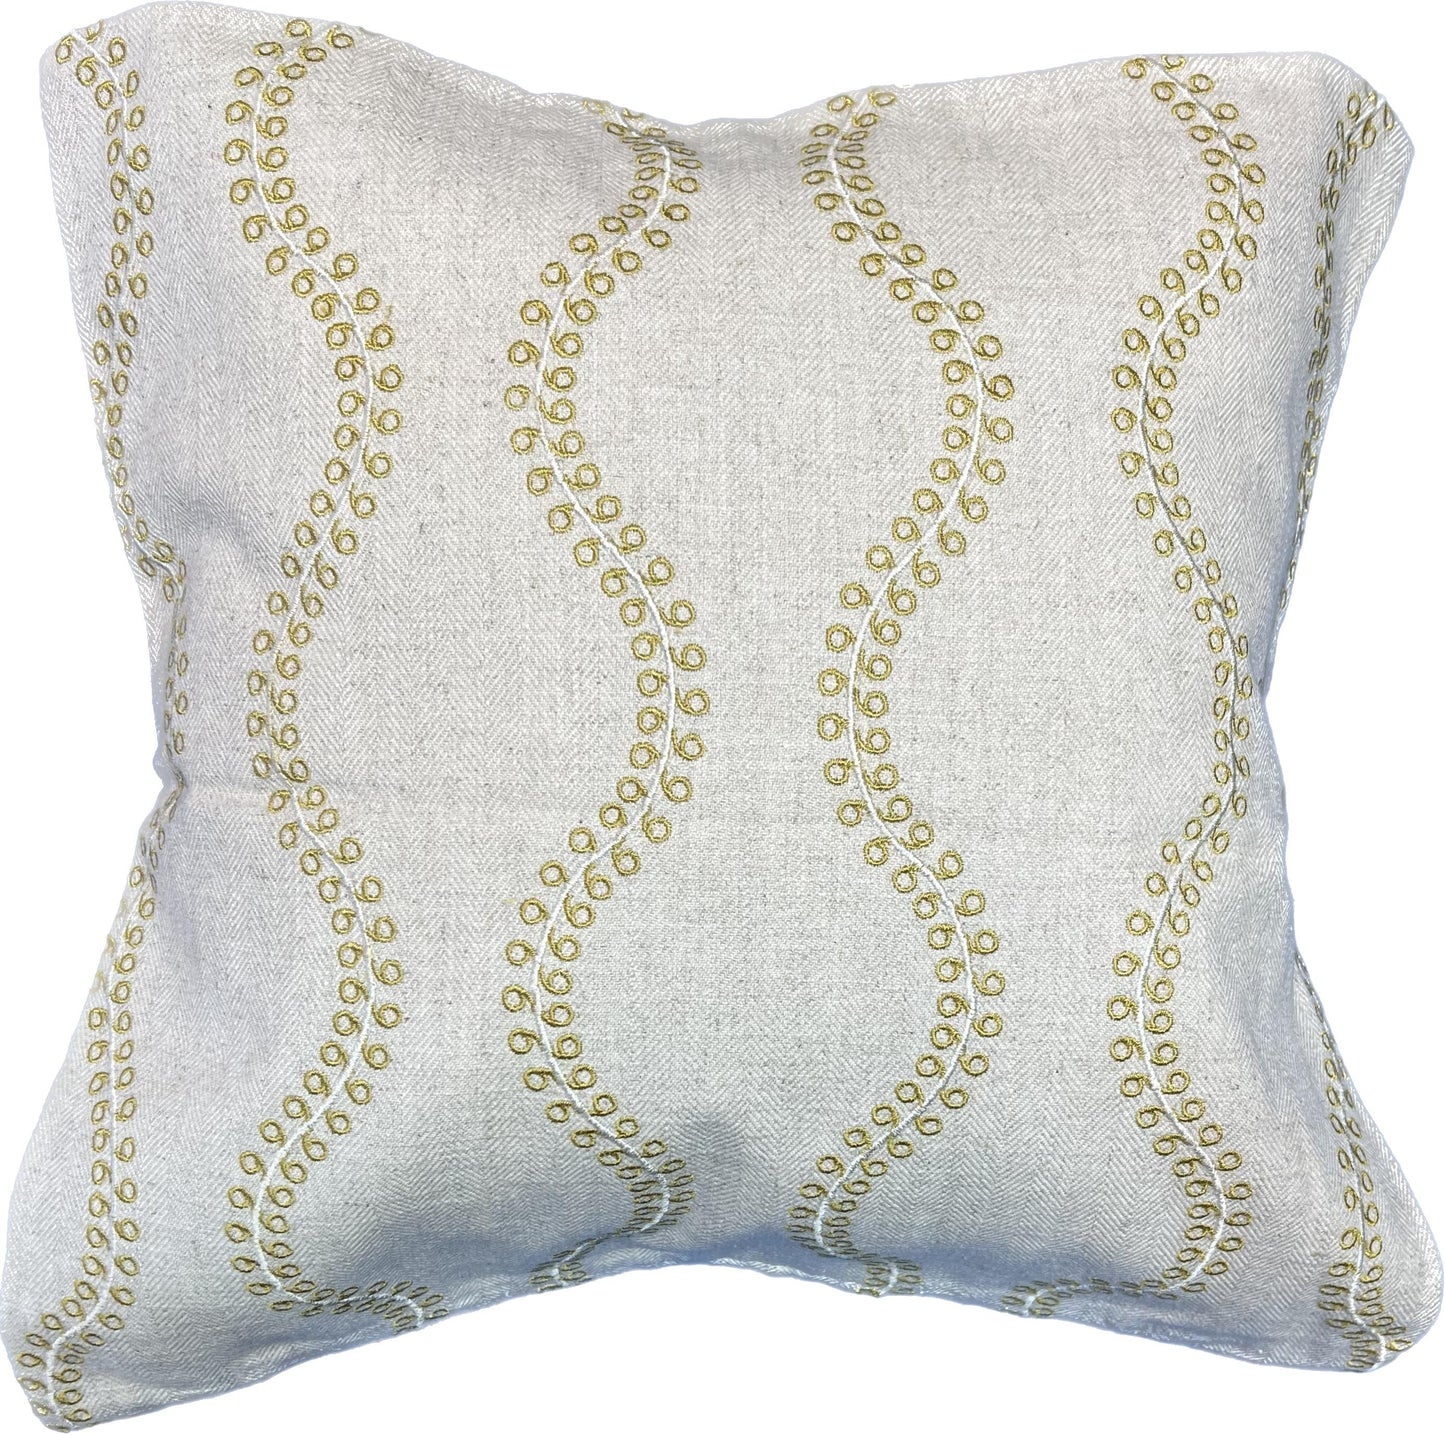 18"x18"  Embroidered Pillow Cover (Clarke & Clarke: F0741/01 Acacia)